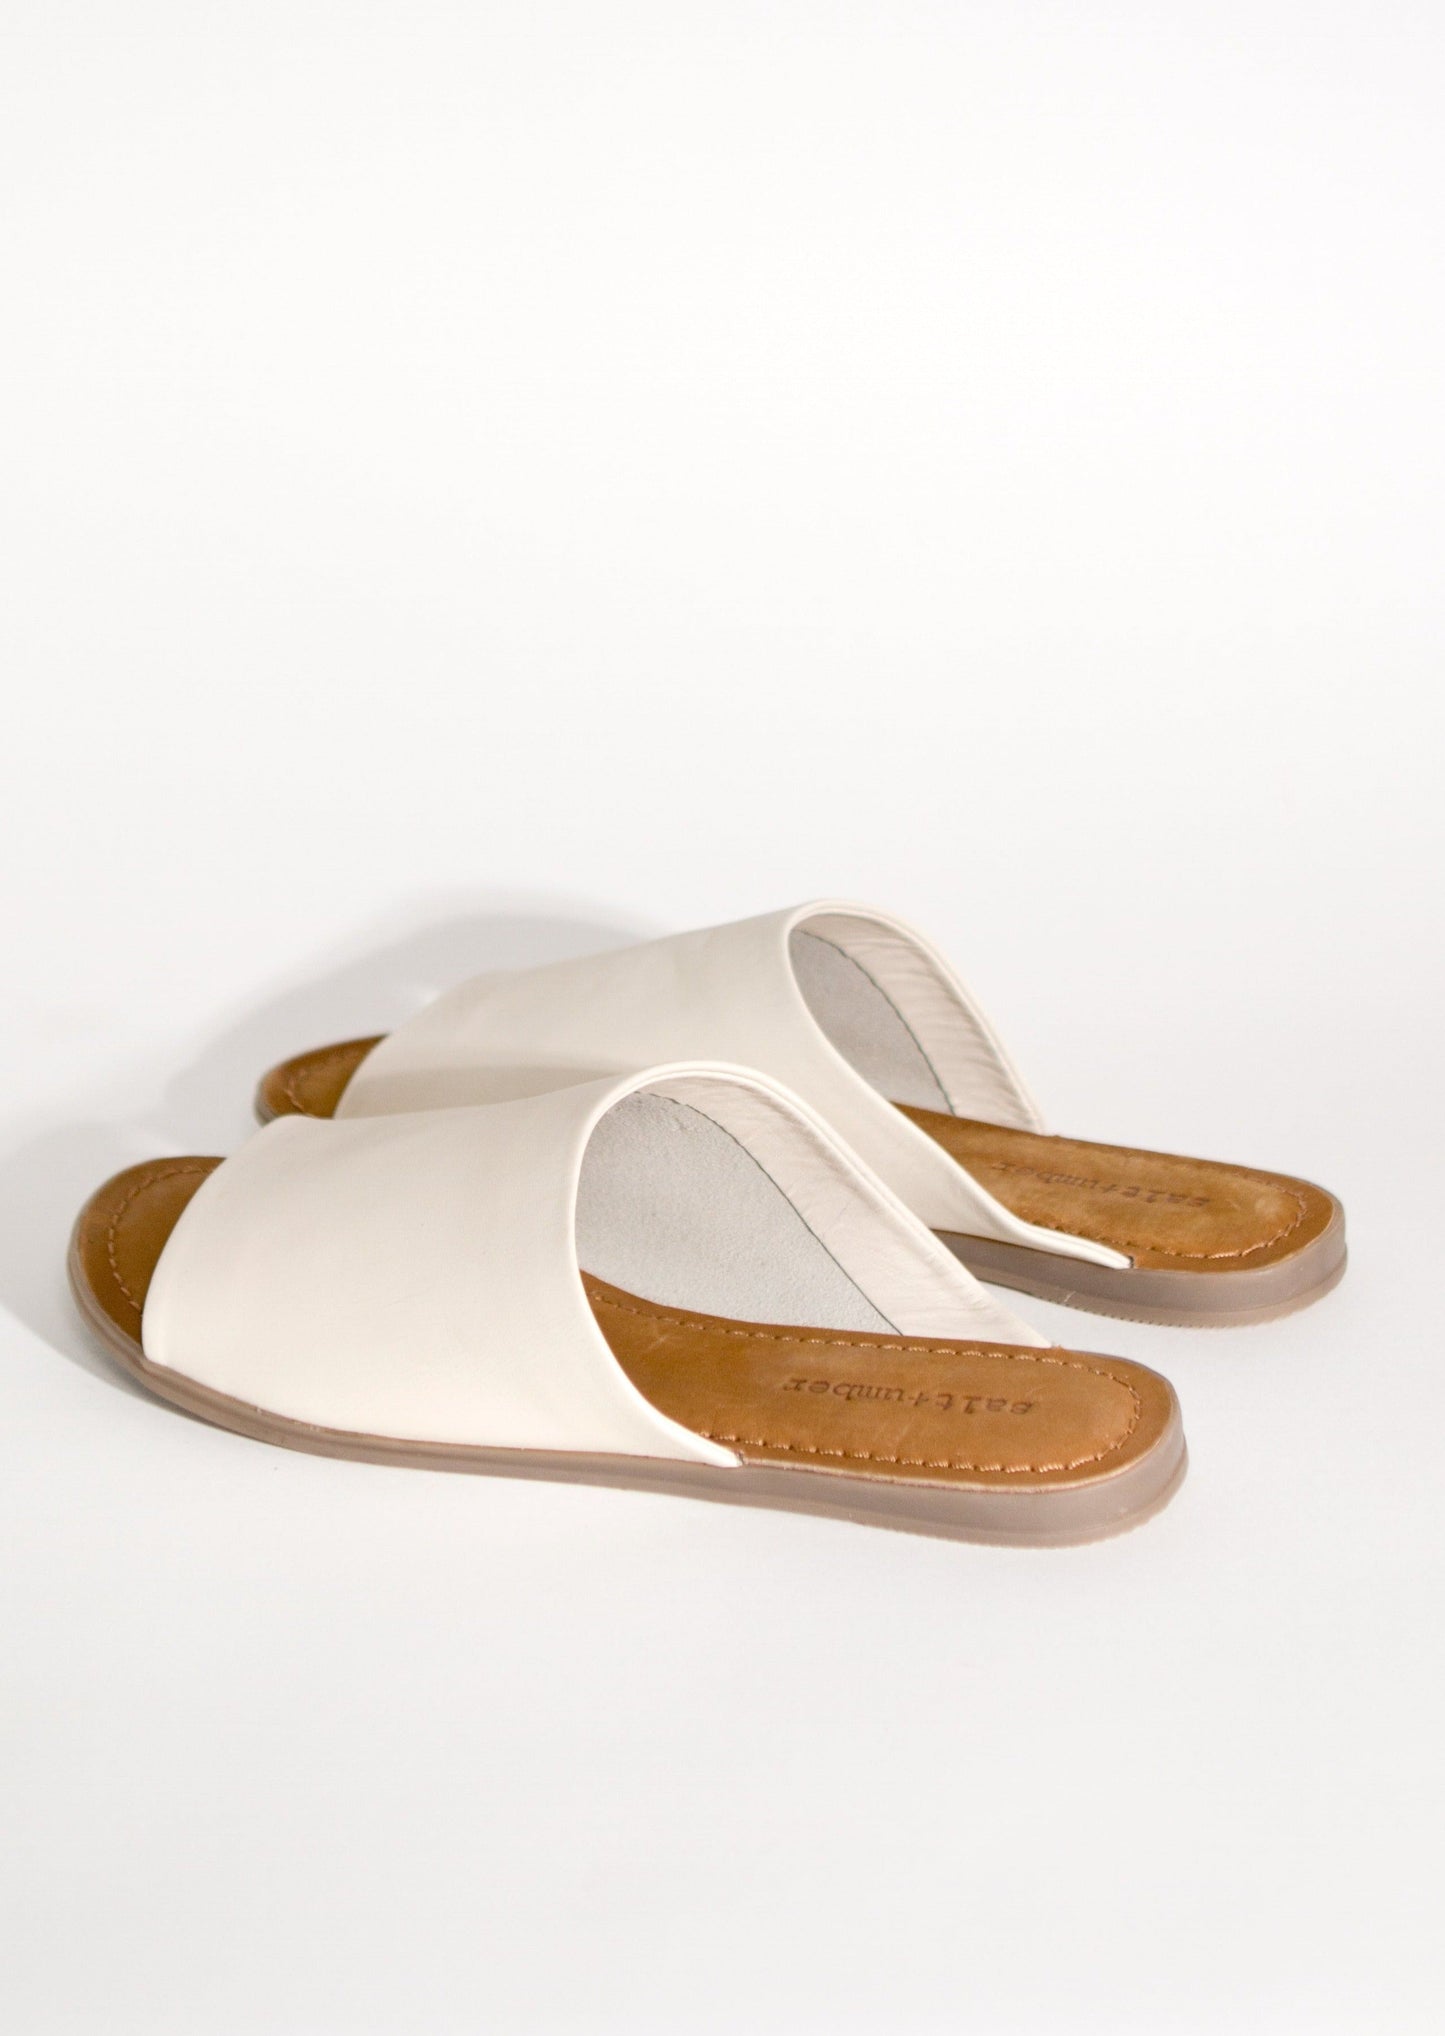 salt + umber -Thoughtfully + Ethically Handcrafted, sustainable shoes ...